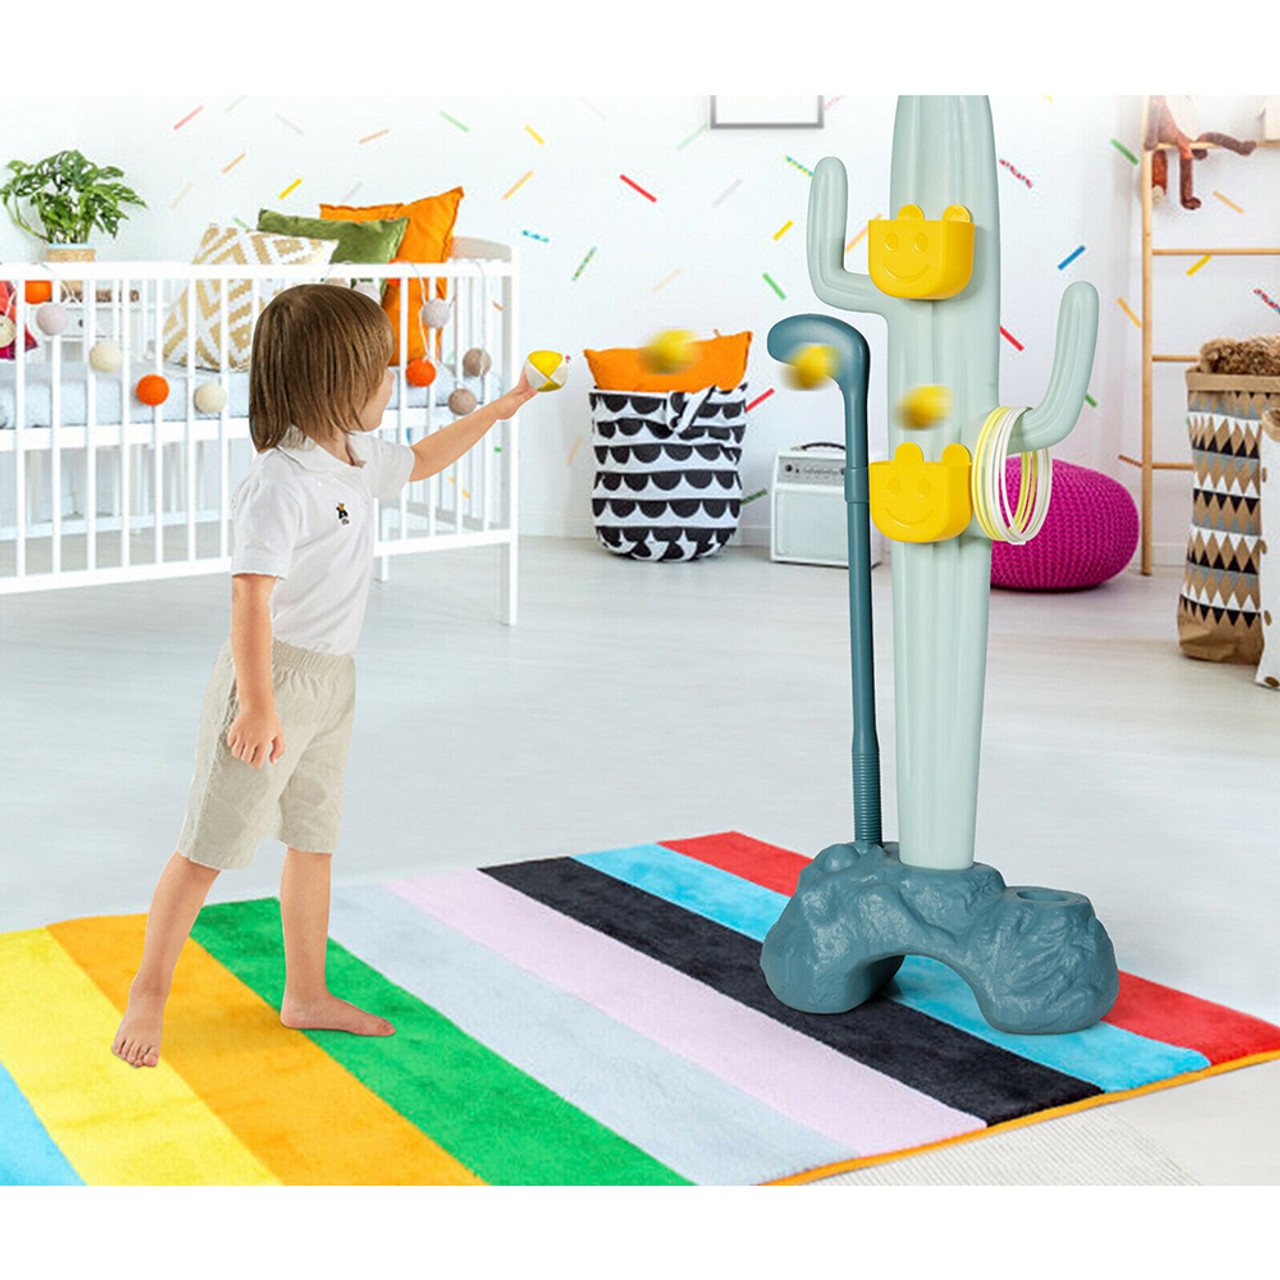 Kids' Cactus 3-in-1 Toy Sports Activity Center product image